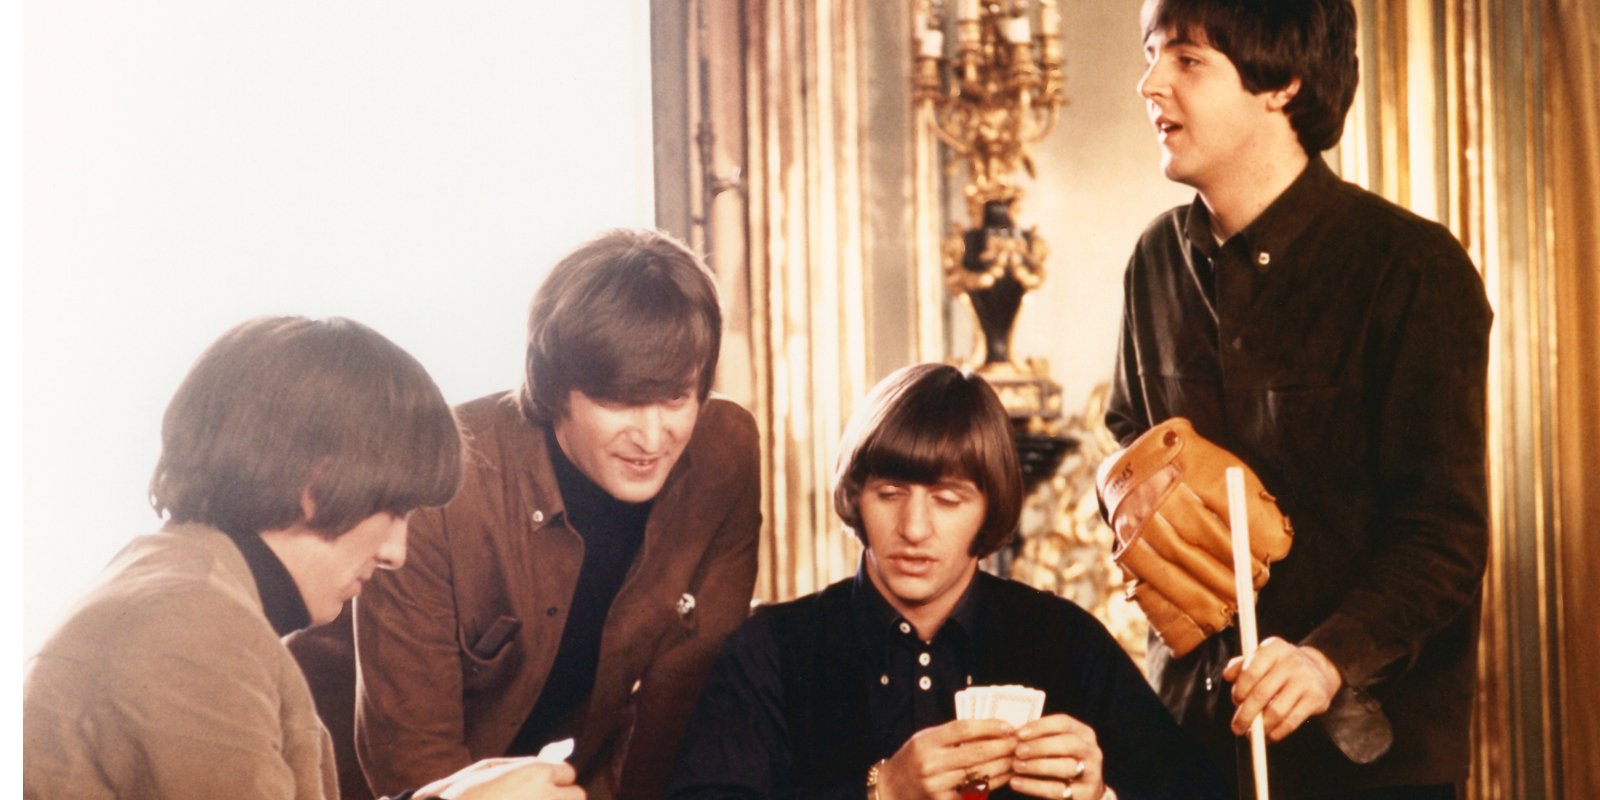 The Beatles on the set of the movie 'Help!'